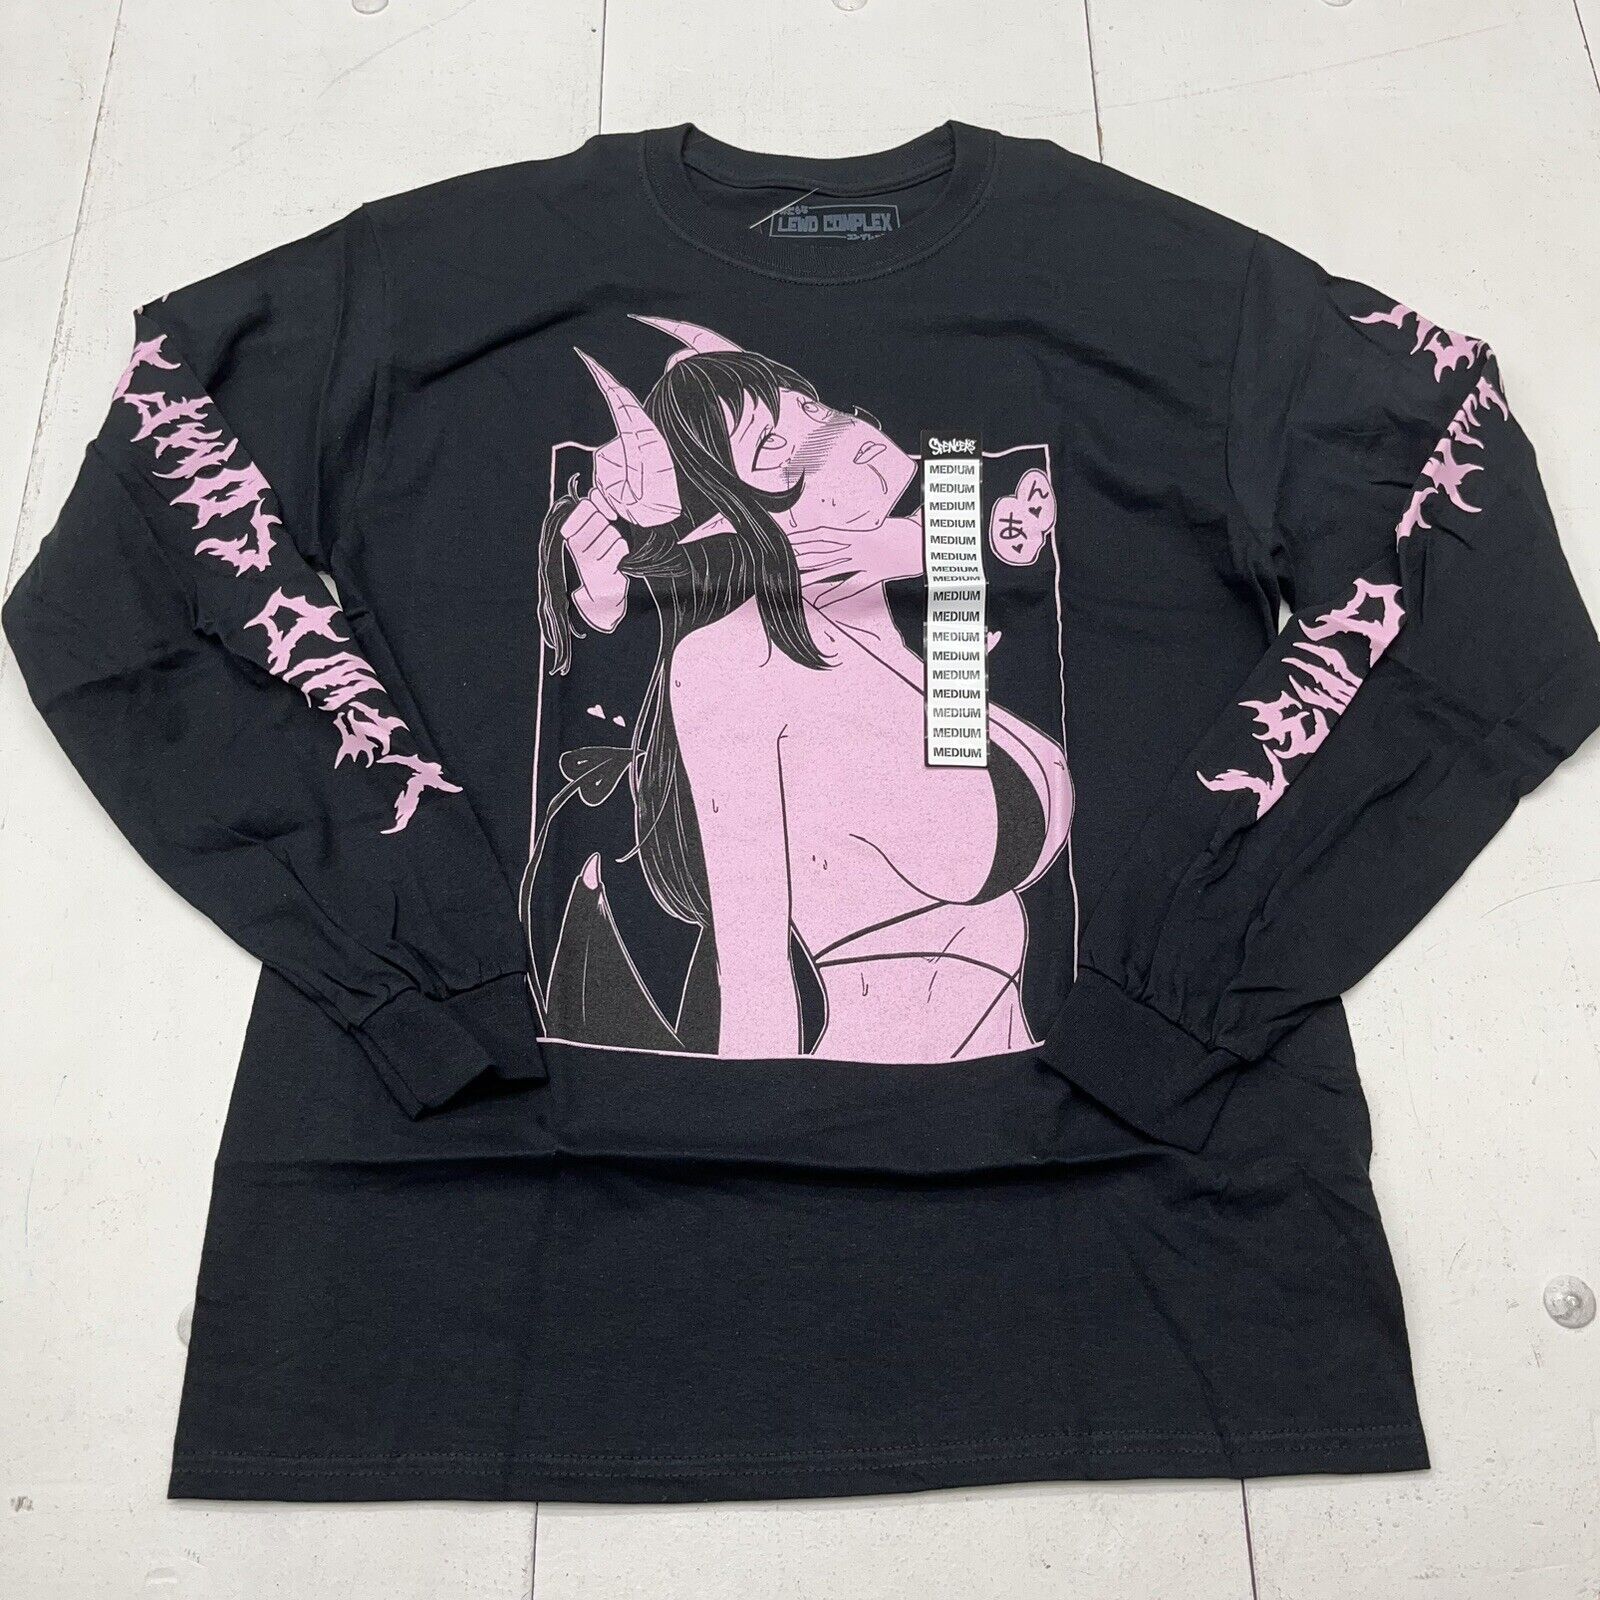 Lewd Complex Black Anime Graphic Long Sleeve T-Shirt Adult Size M NEW Spencer’s